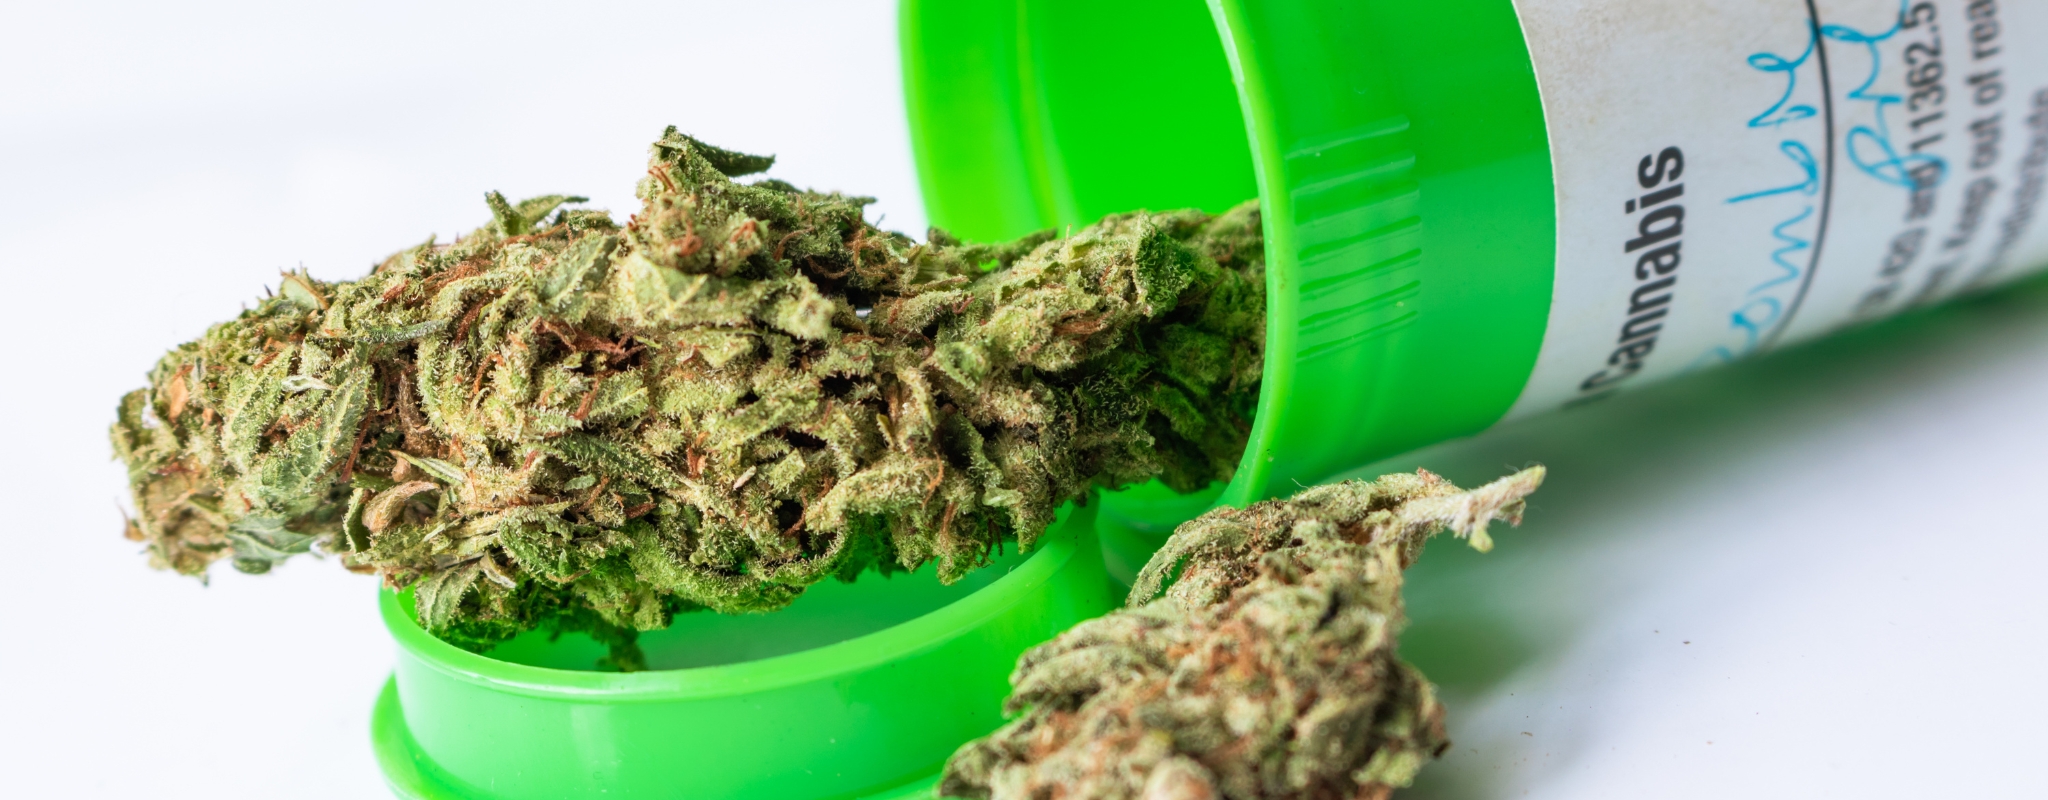 A close up of a container of medical cannabis.